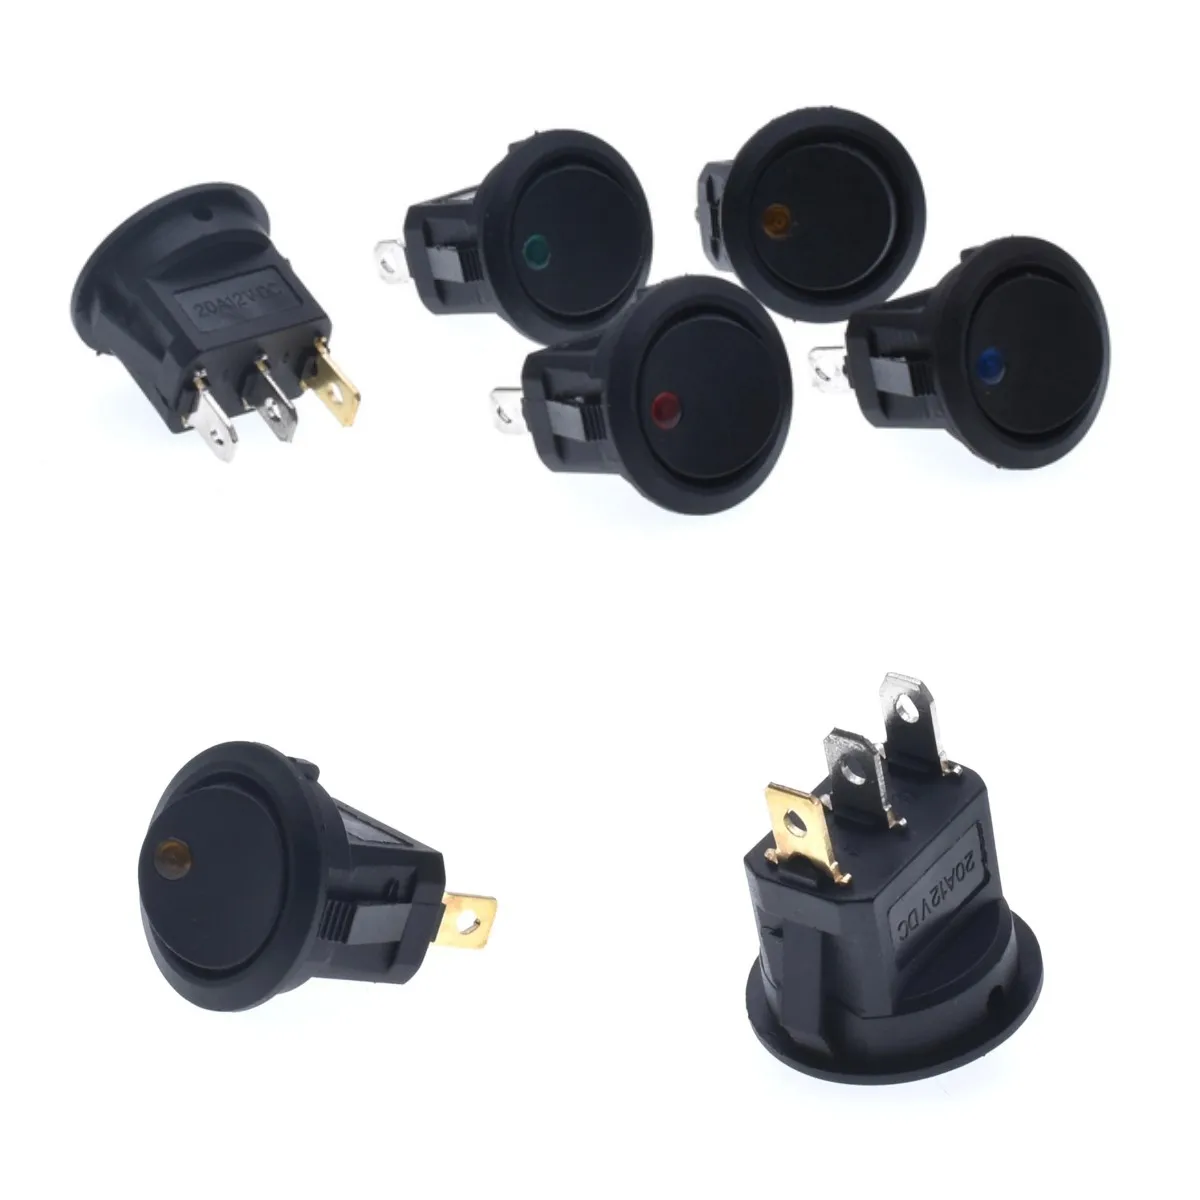 5PCS/Lot KCD1 12V 3PIN RED Black Green Blue,Cat's eye with light,Small Round DPDT Push Button Boat Power Hot Sale Rocker Switche car switch button seat heating control for suv truck seats heater switches 3pin round heated rocker dc 12v off on control